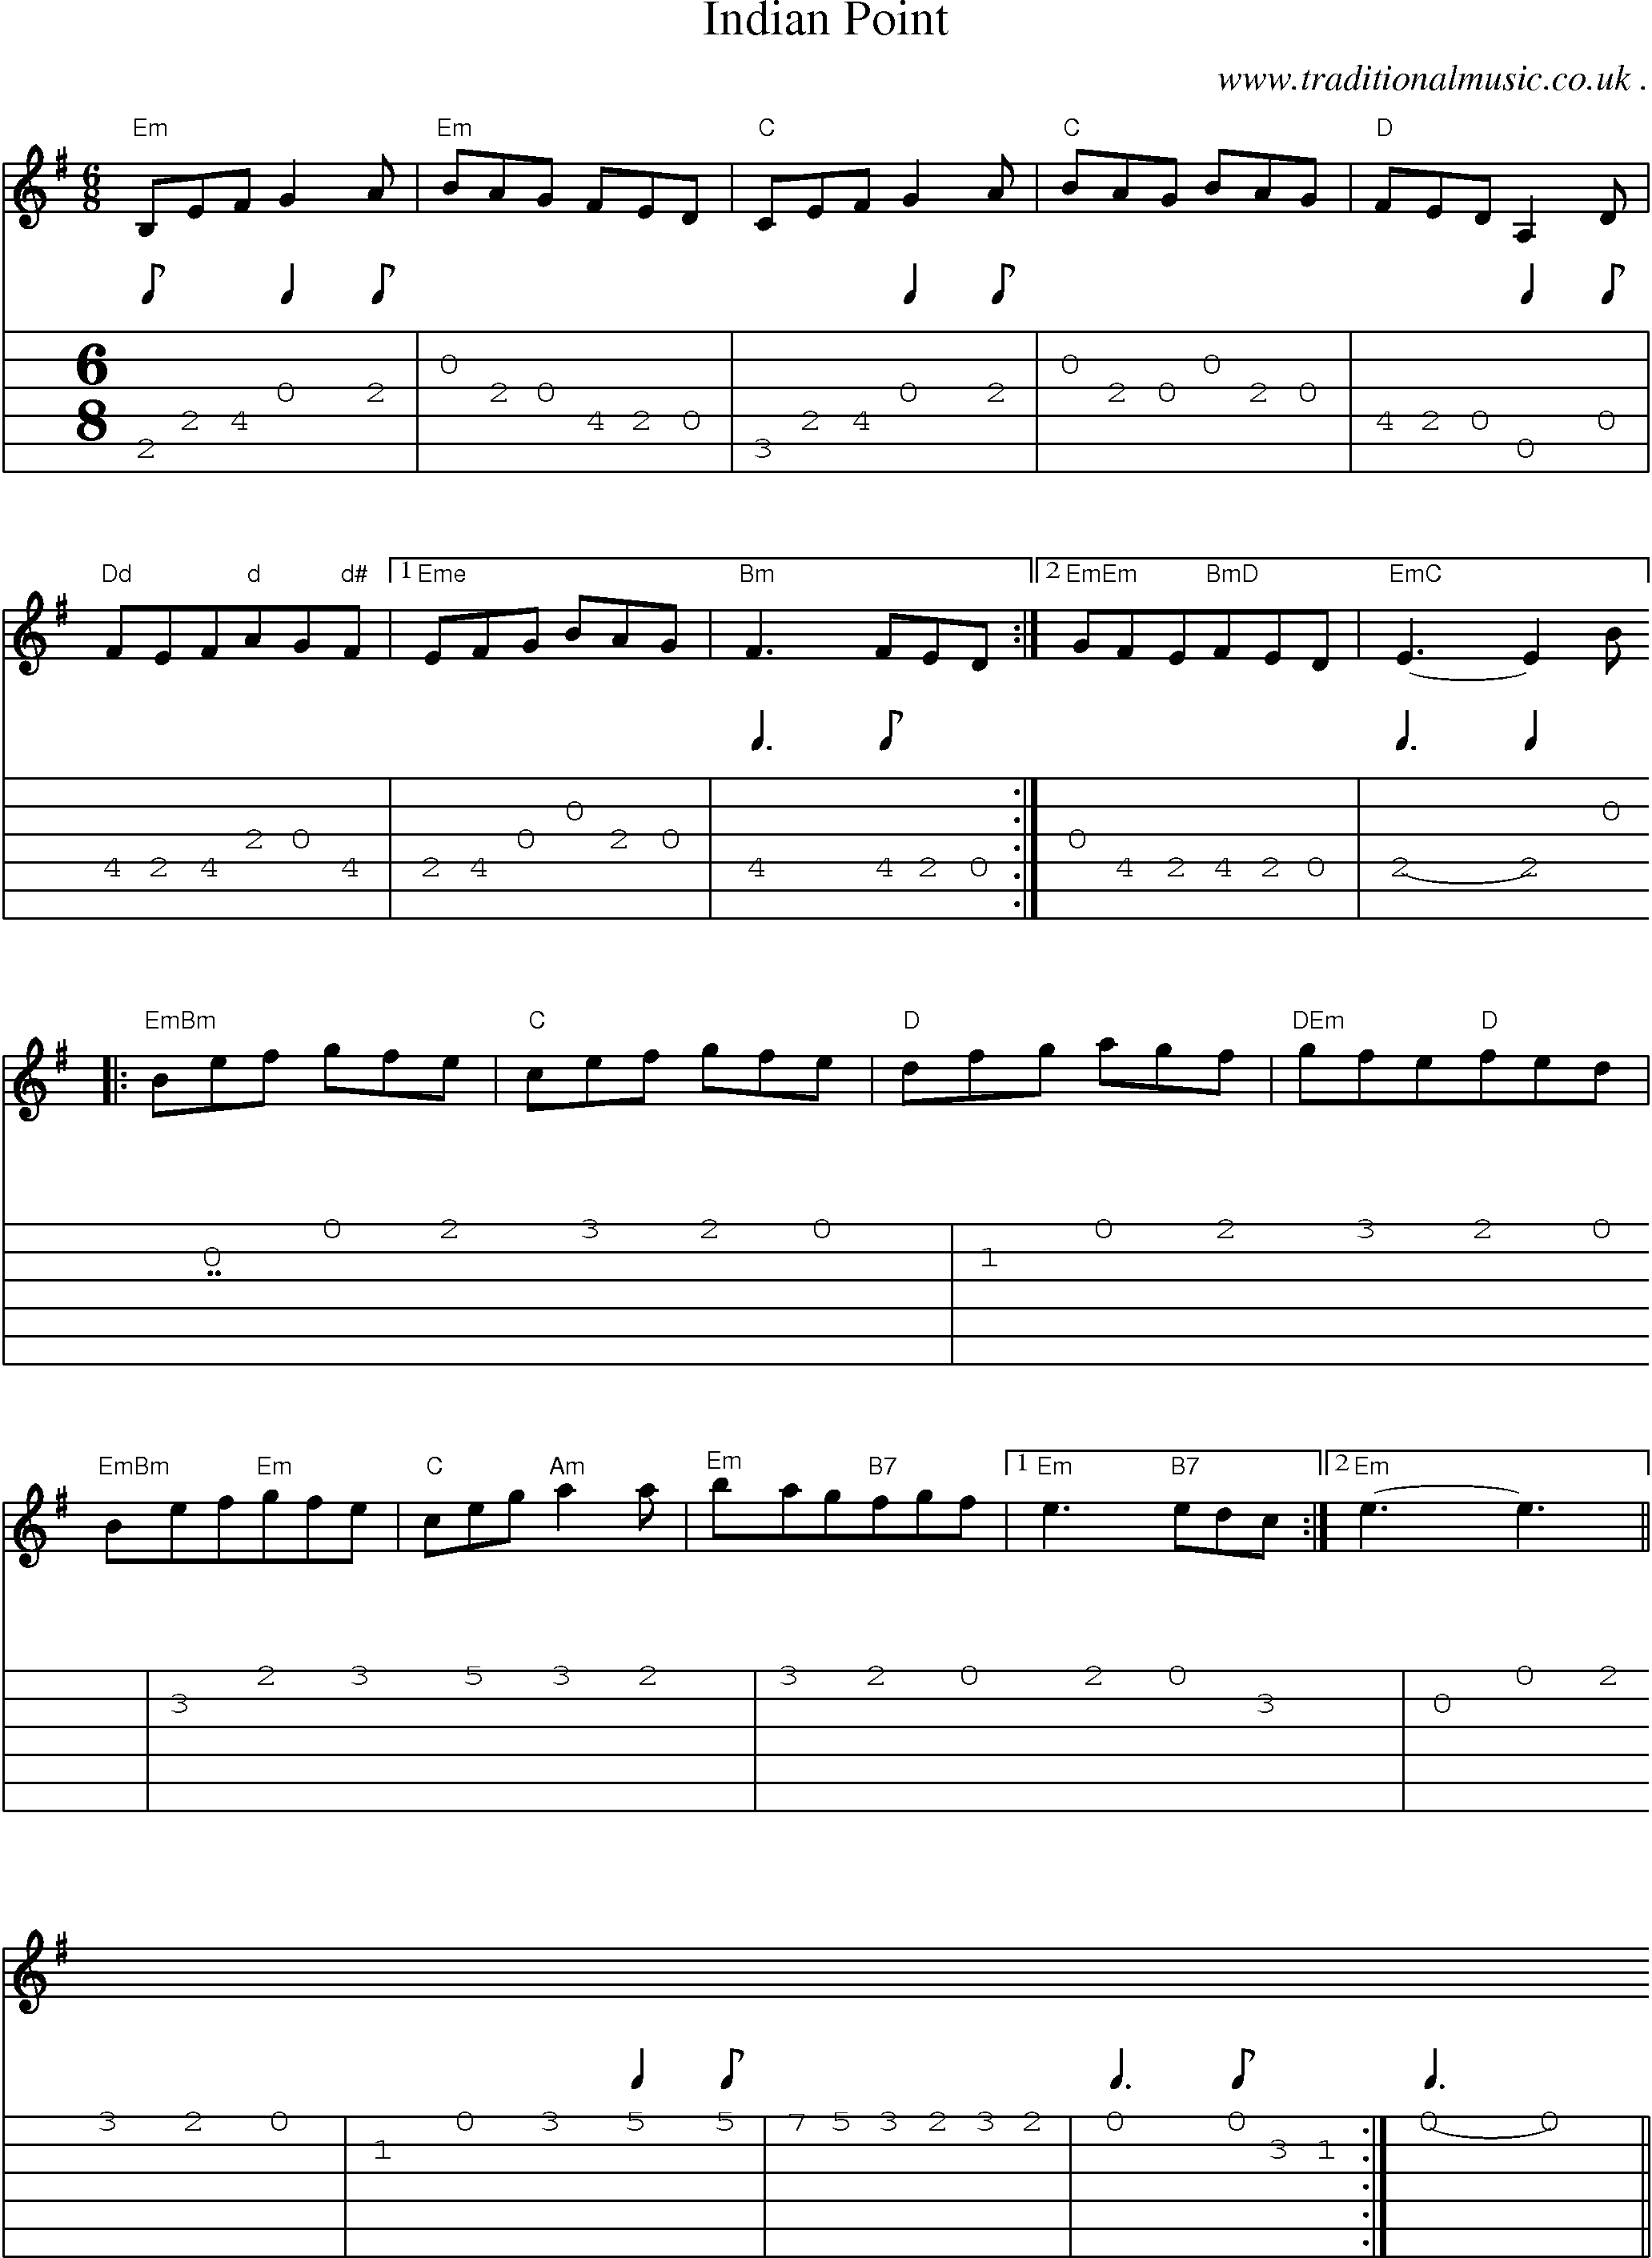 Music Score and Guitar Tabs for Indian Point